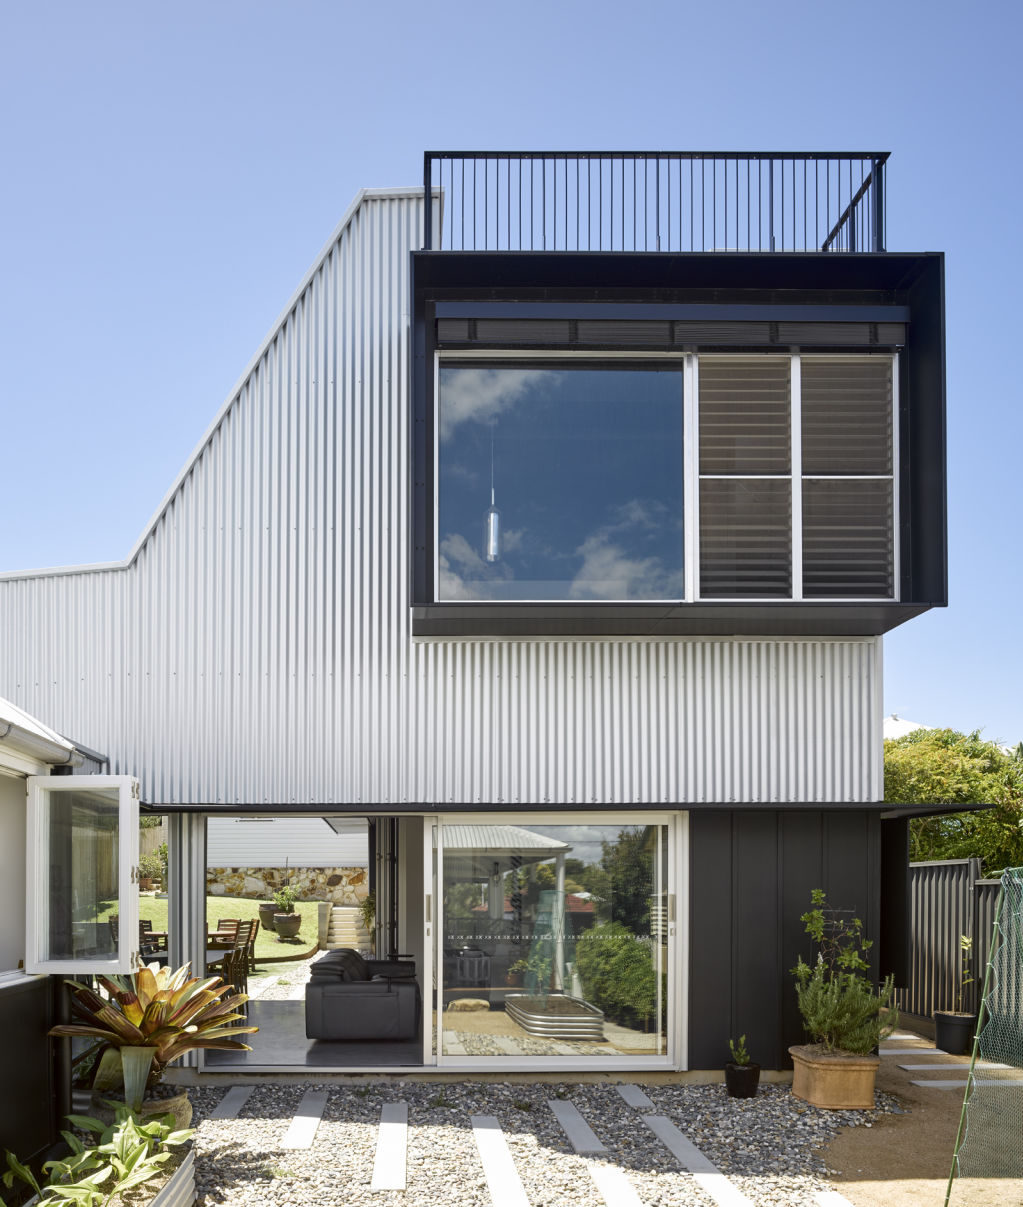 Take a look at some of Australia's best houses this year